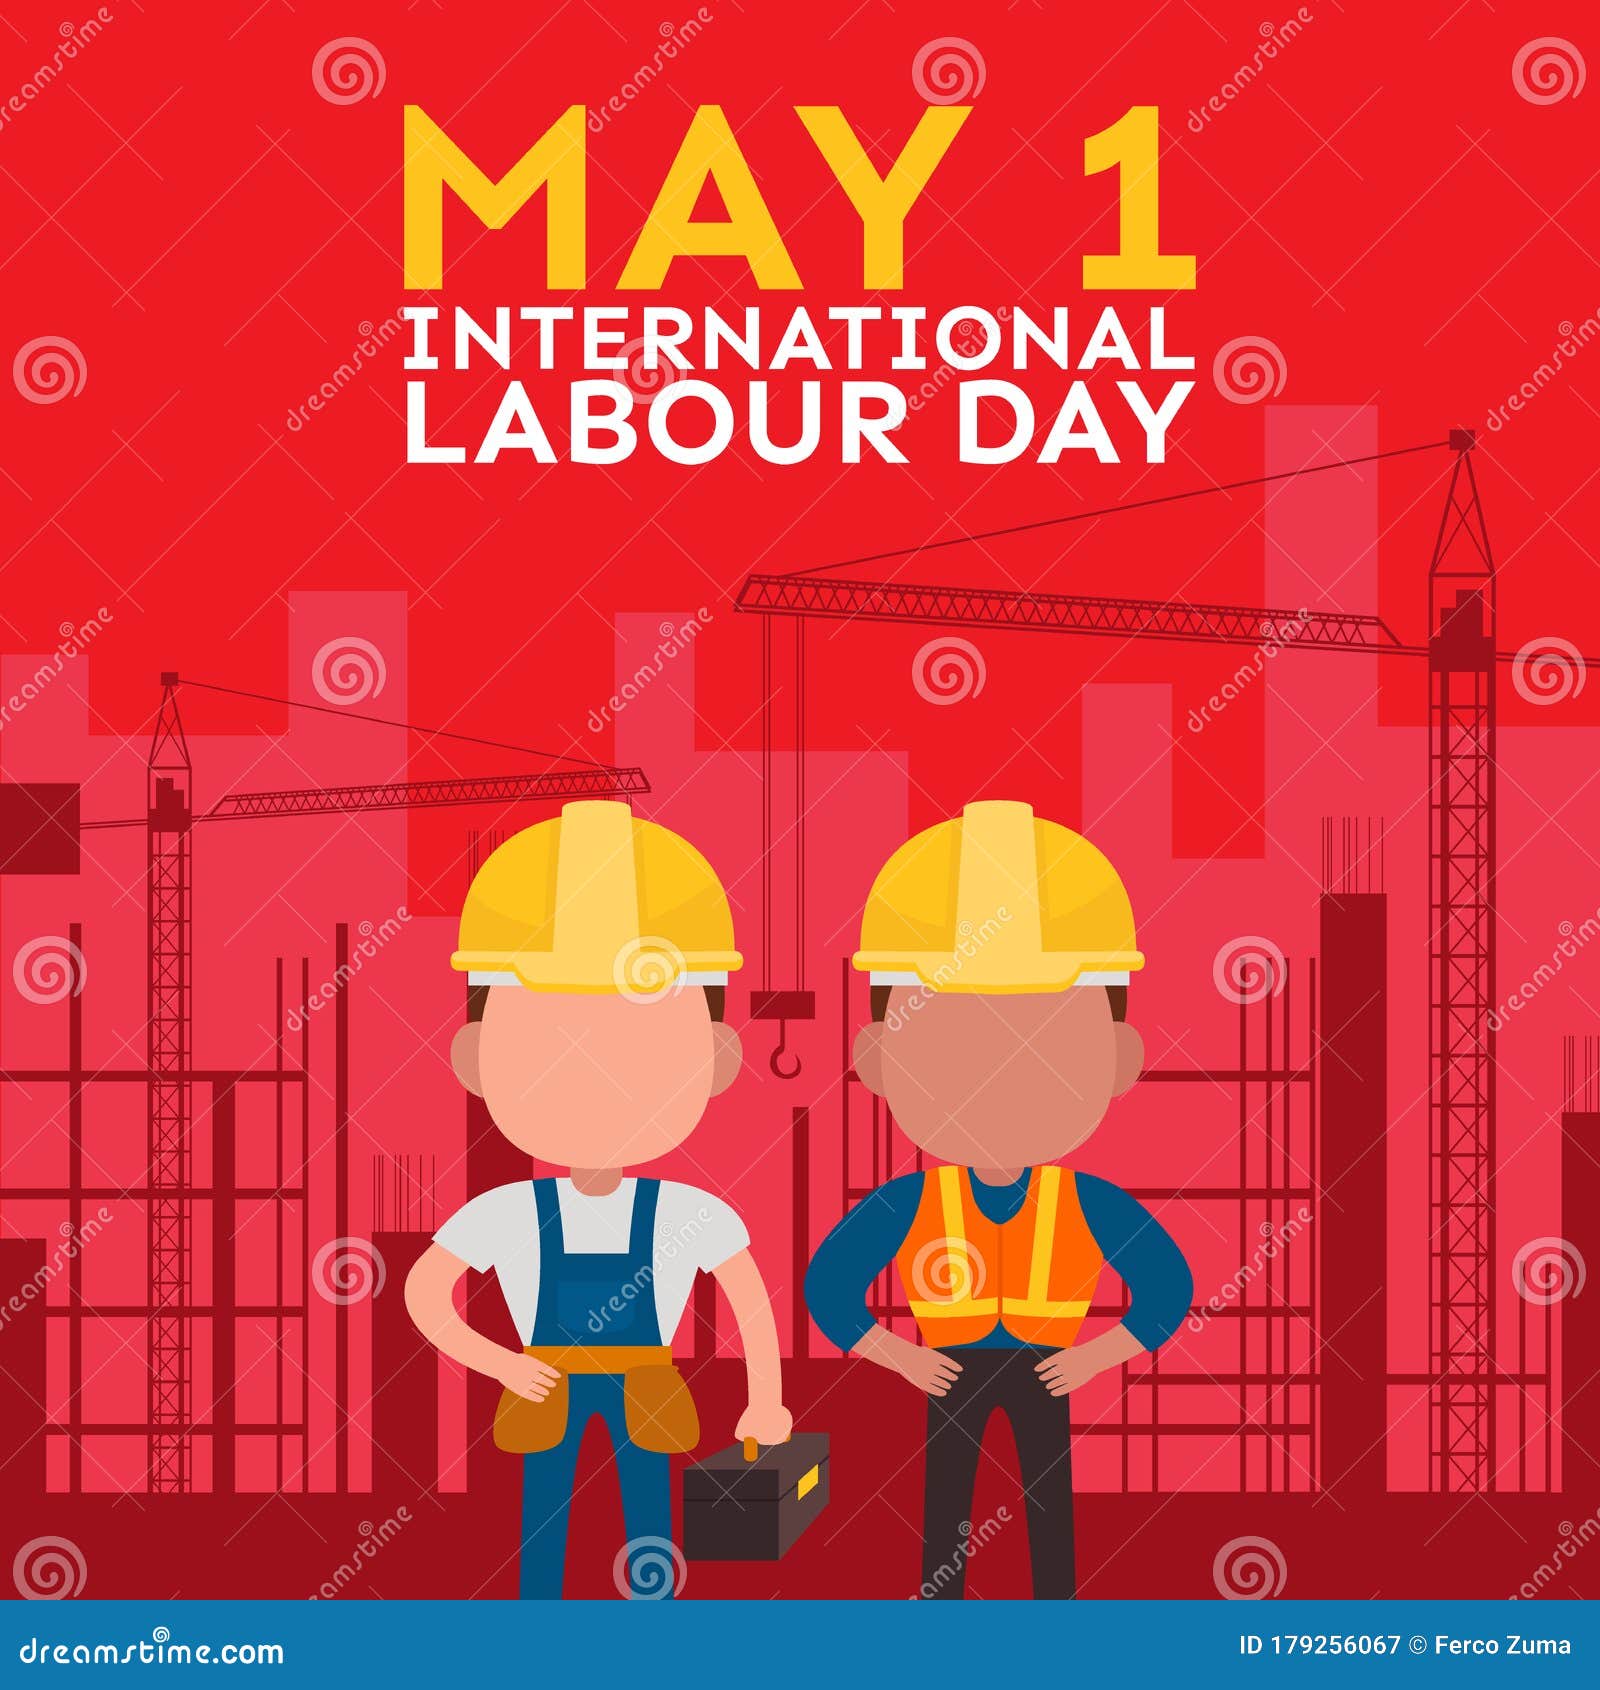 International Labour Day Poster with Worker Illustration Stock Vector